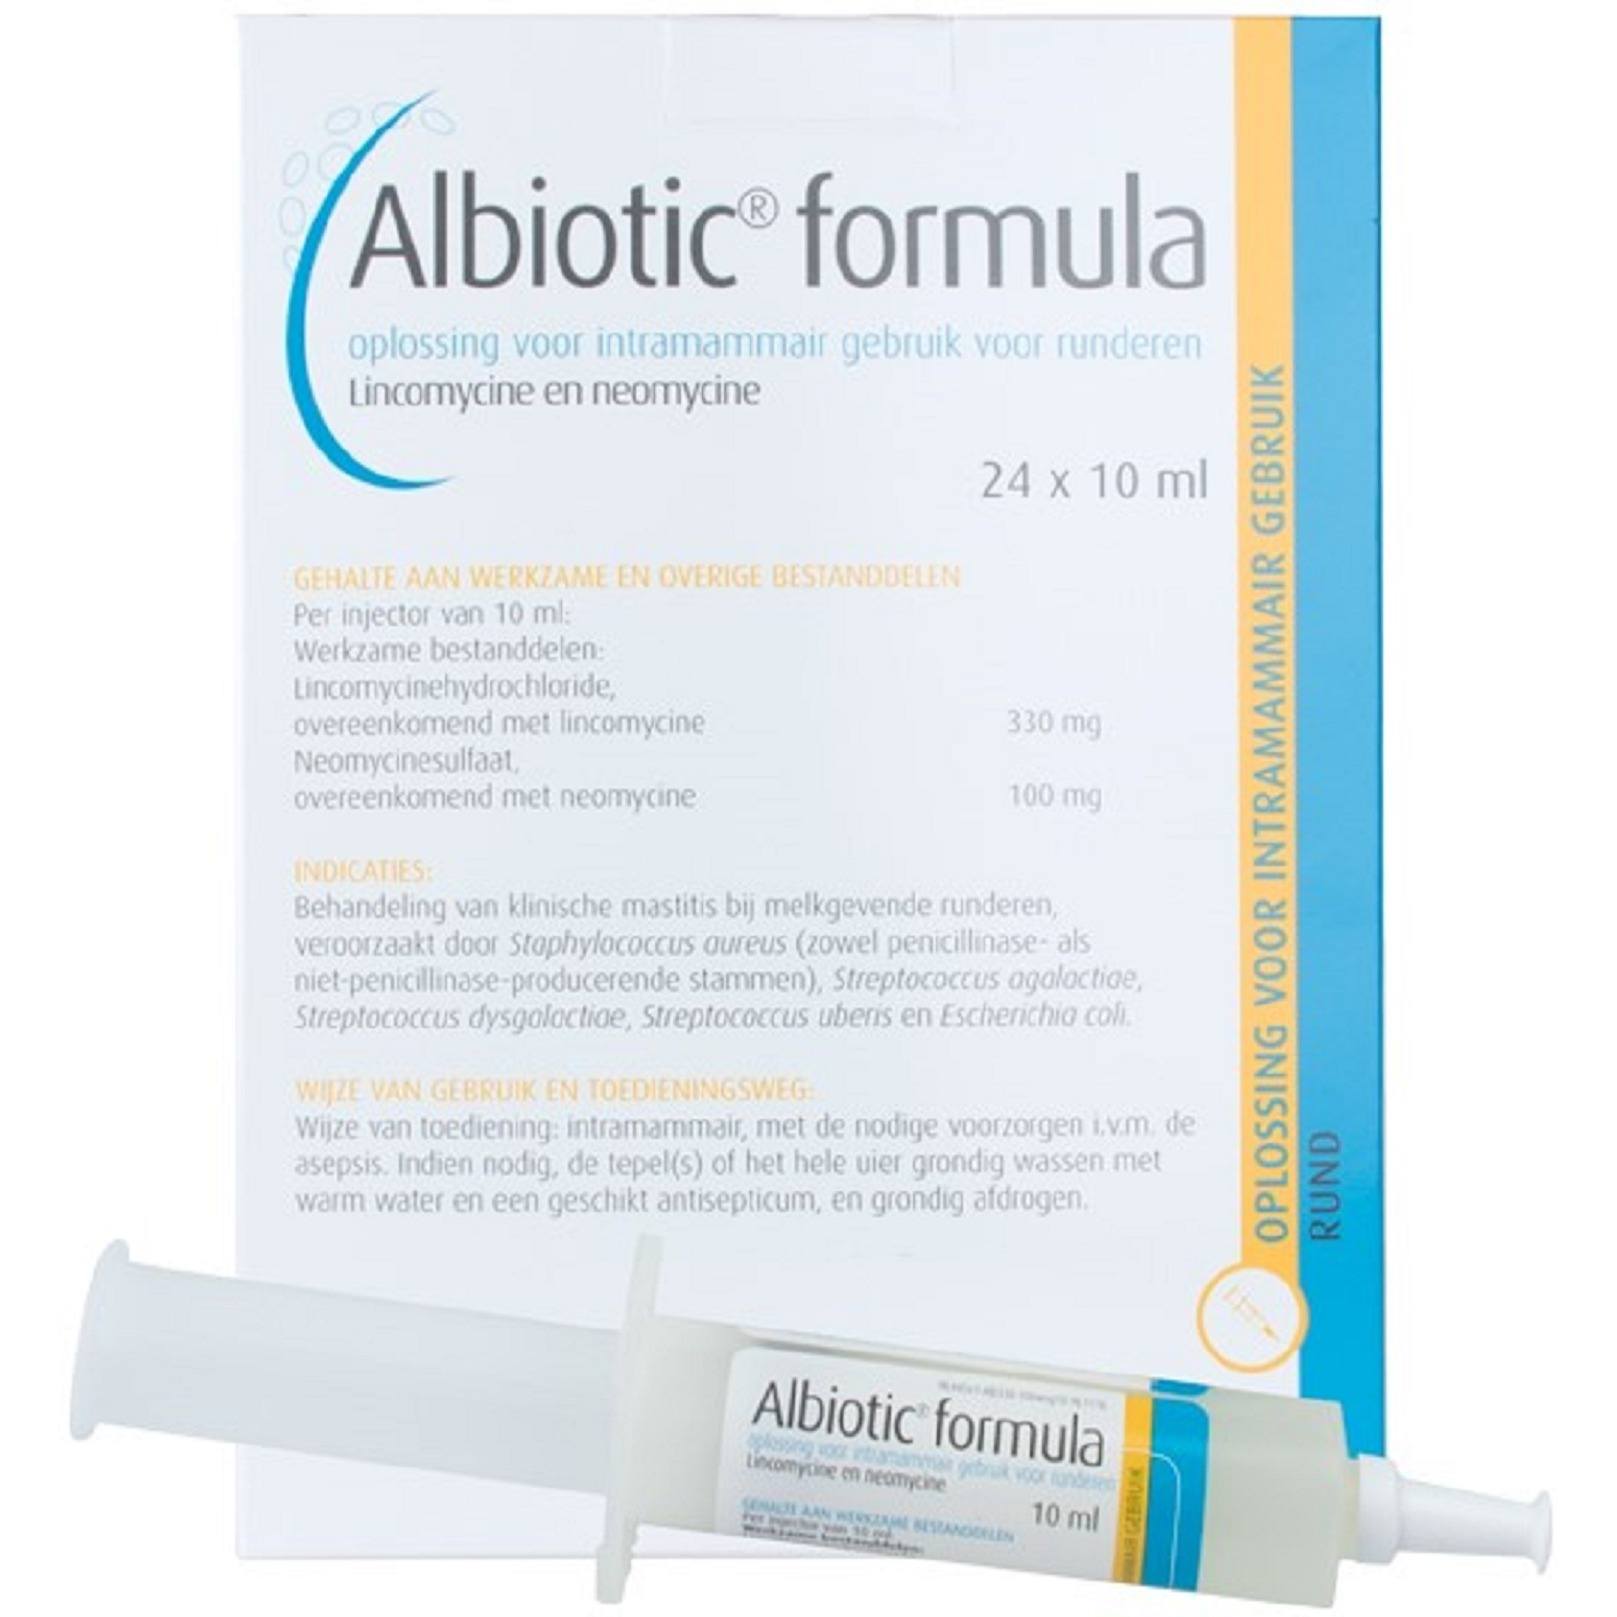 Albiotic 330mg/100mg Intramammary Solution